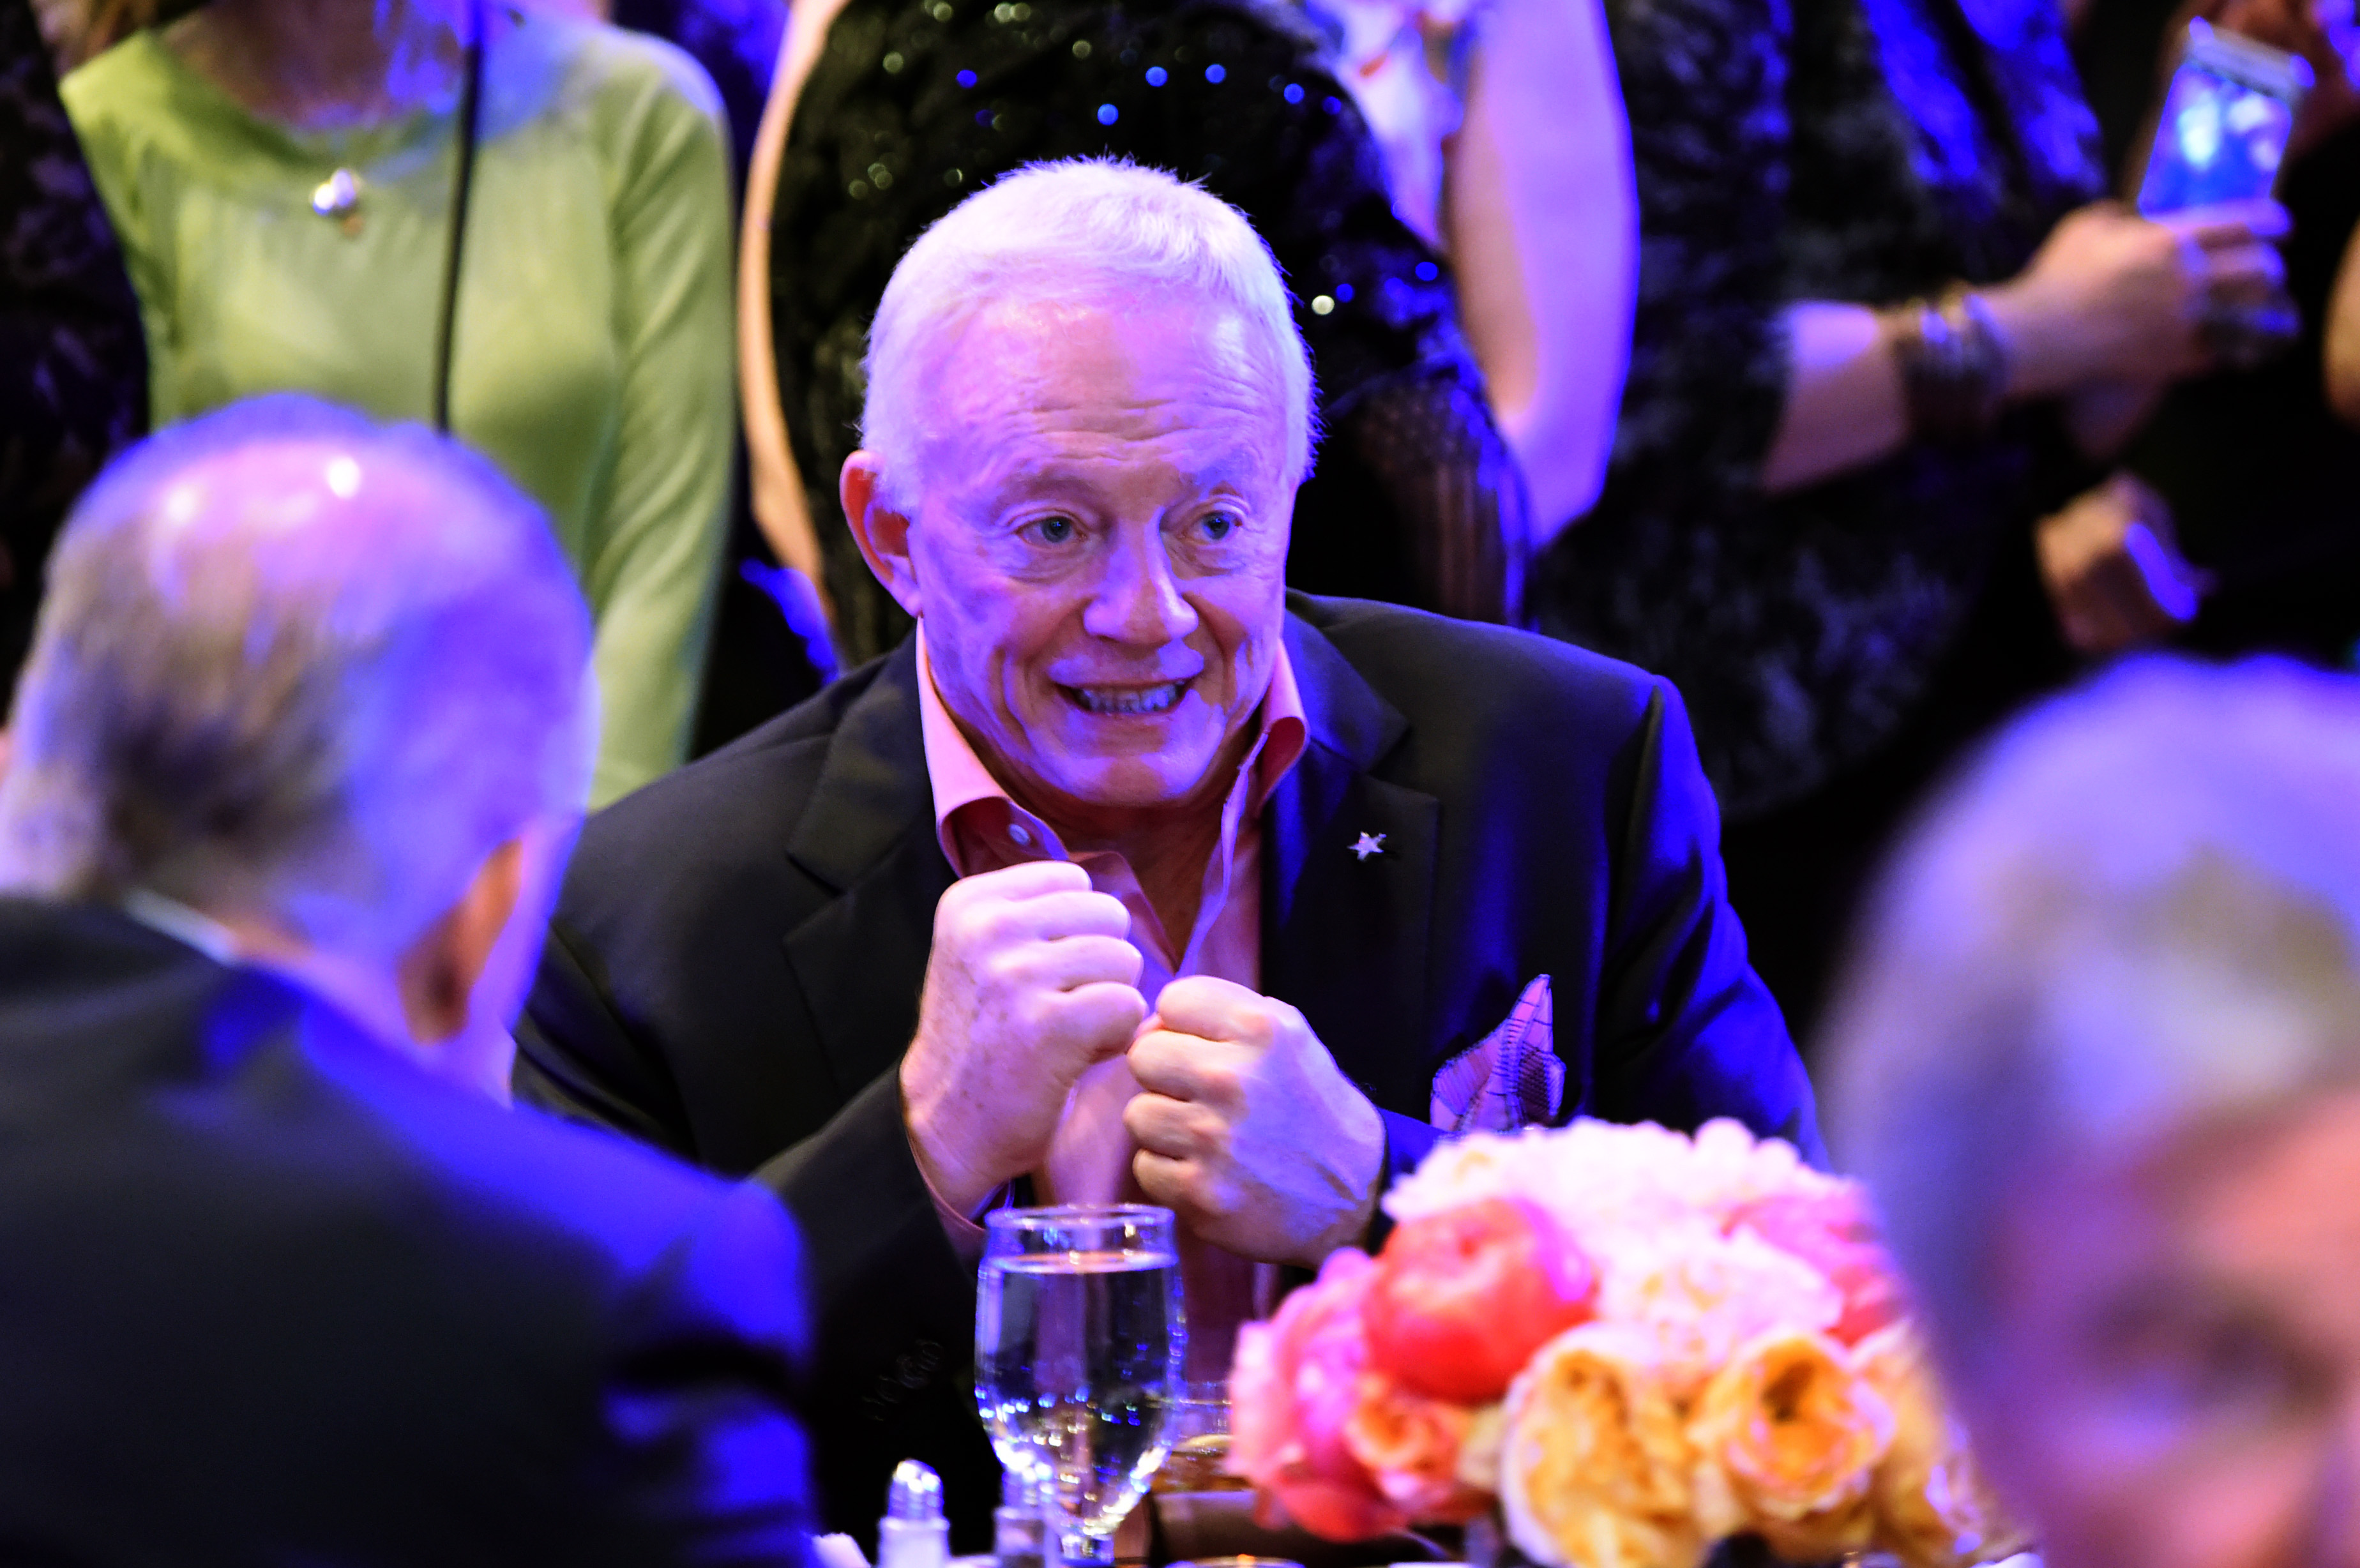 Cowboys owner Jerry Jones has an impressive $8.6 billion net worth, but he pales in comparison to the richest NFL owner in 2020.